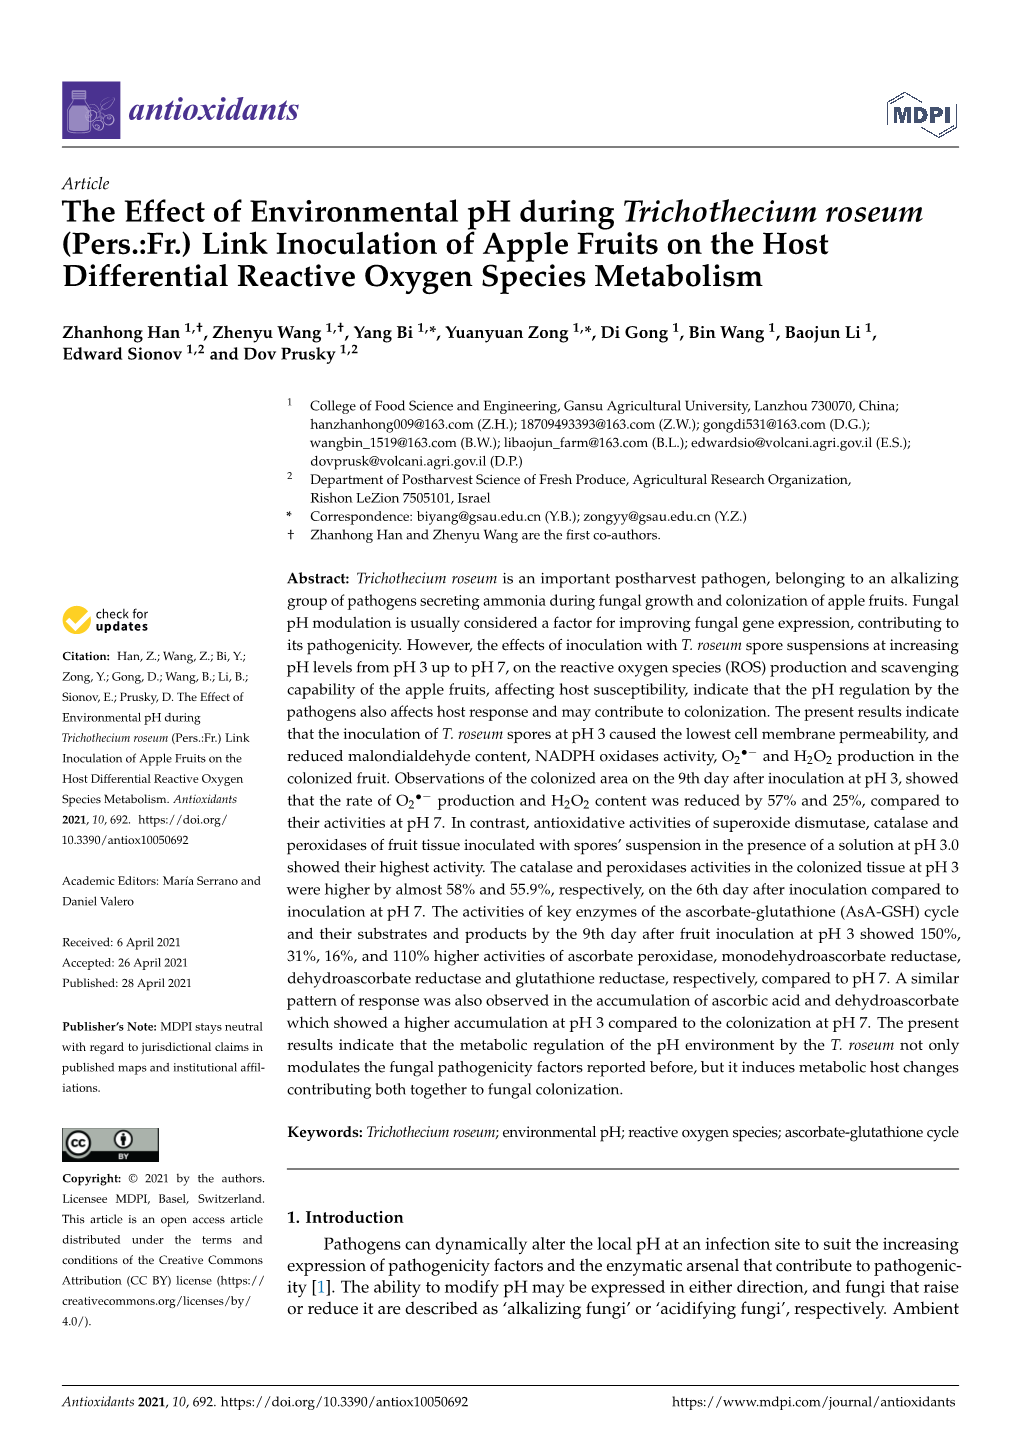 The Effect of Environmental Ph During Trichothecium Roseum (Pers.:Fr.) Link Inoculation of Apple Fruits on the Host Differential Reactive Oxygen Species Metabolism